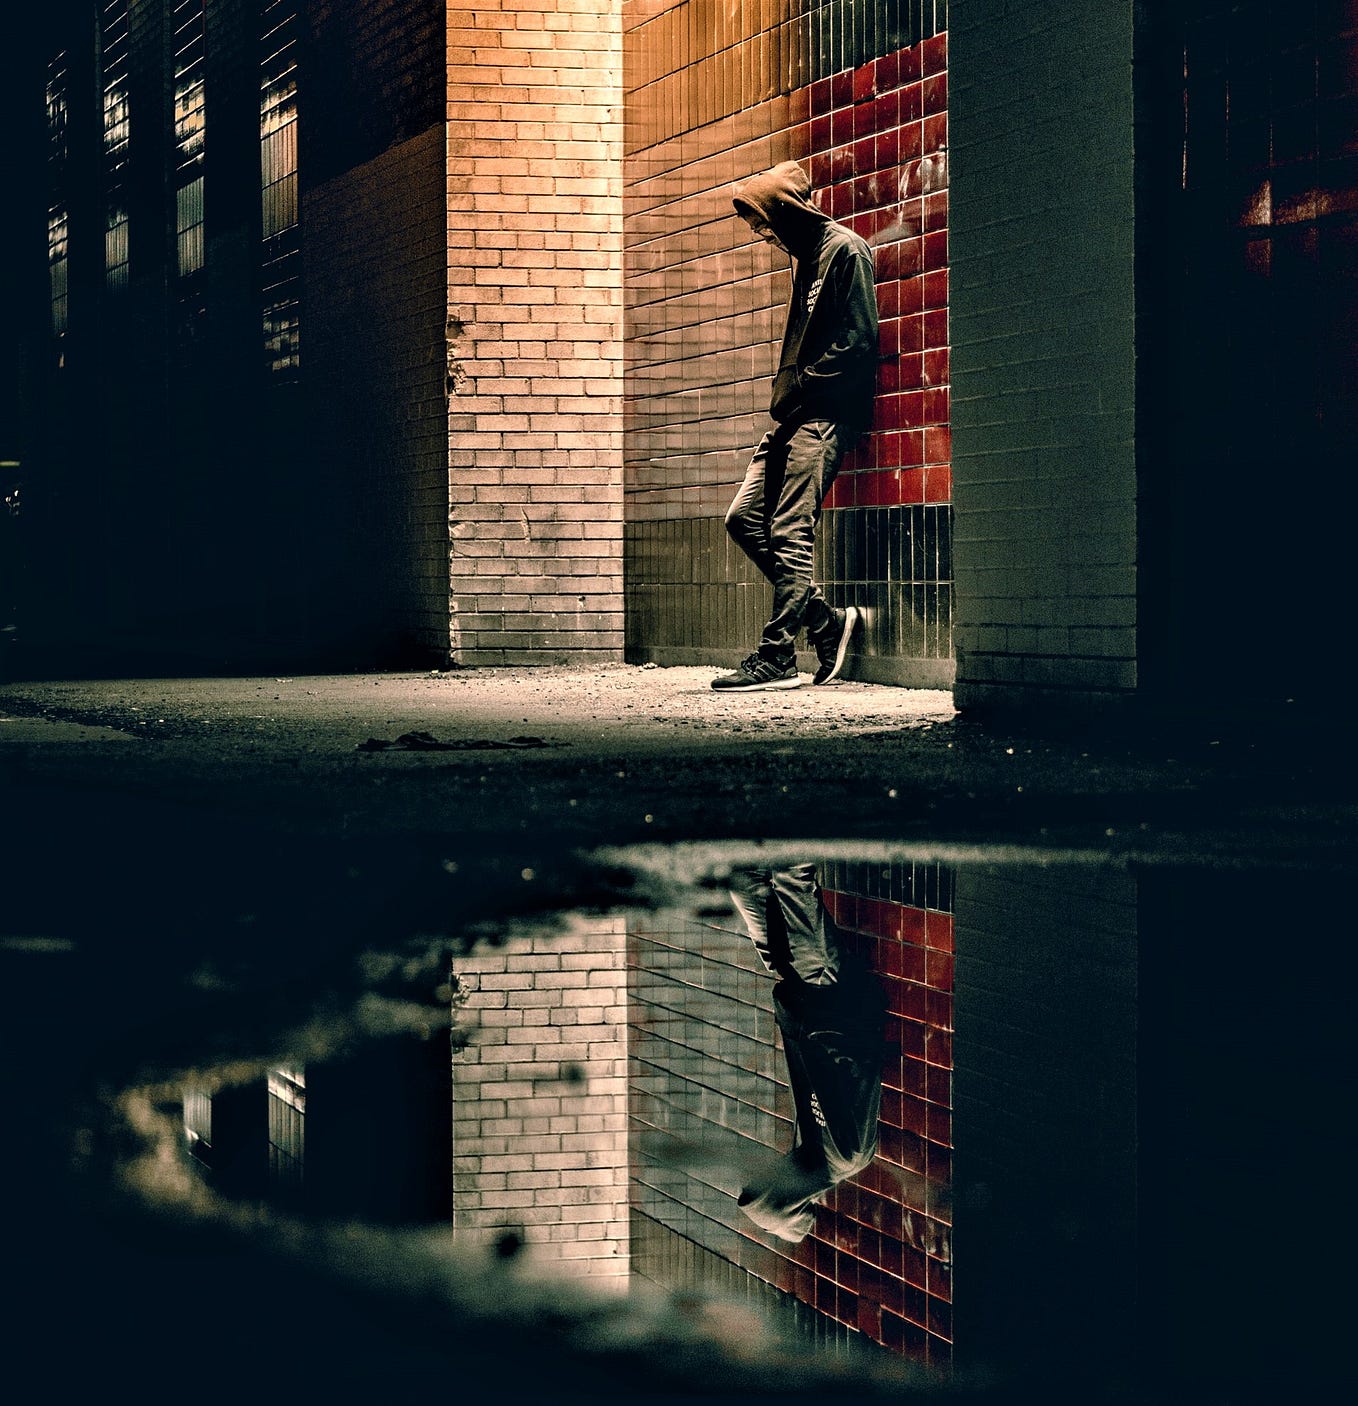 young man wearing hooded sweatshirt leaning against brick wall at night with reflection in puddle